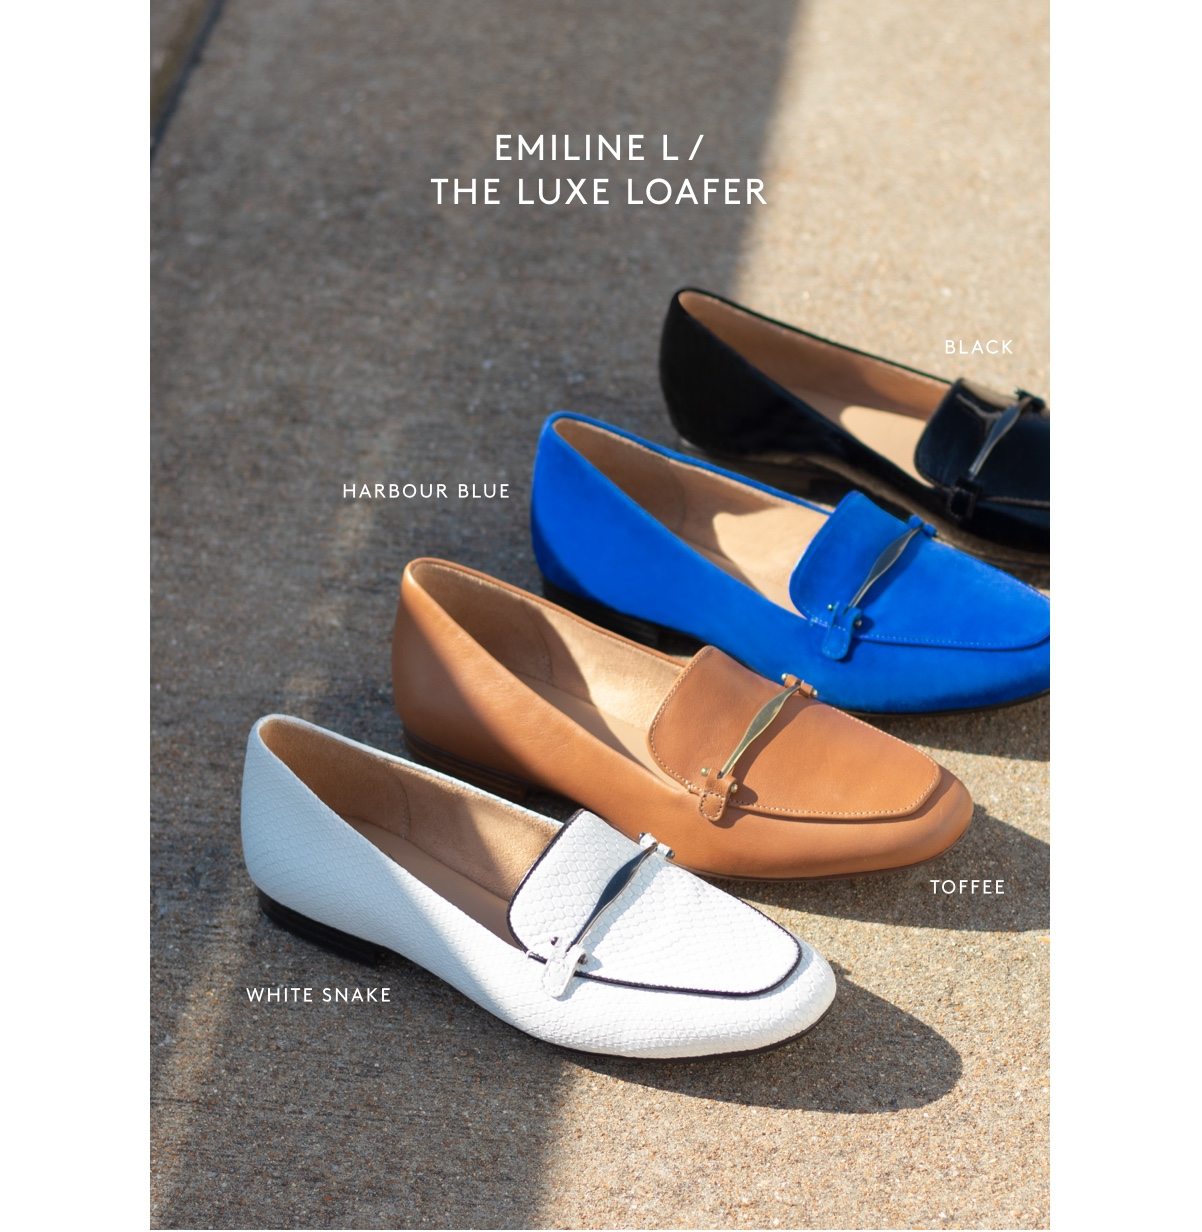 Emiline L/ The Luxe loafer | Harbour Blue / Toffee / White Snake